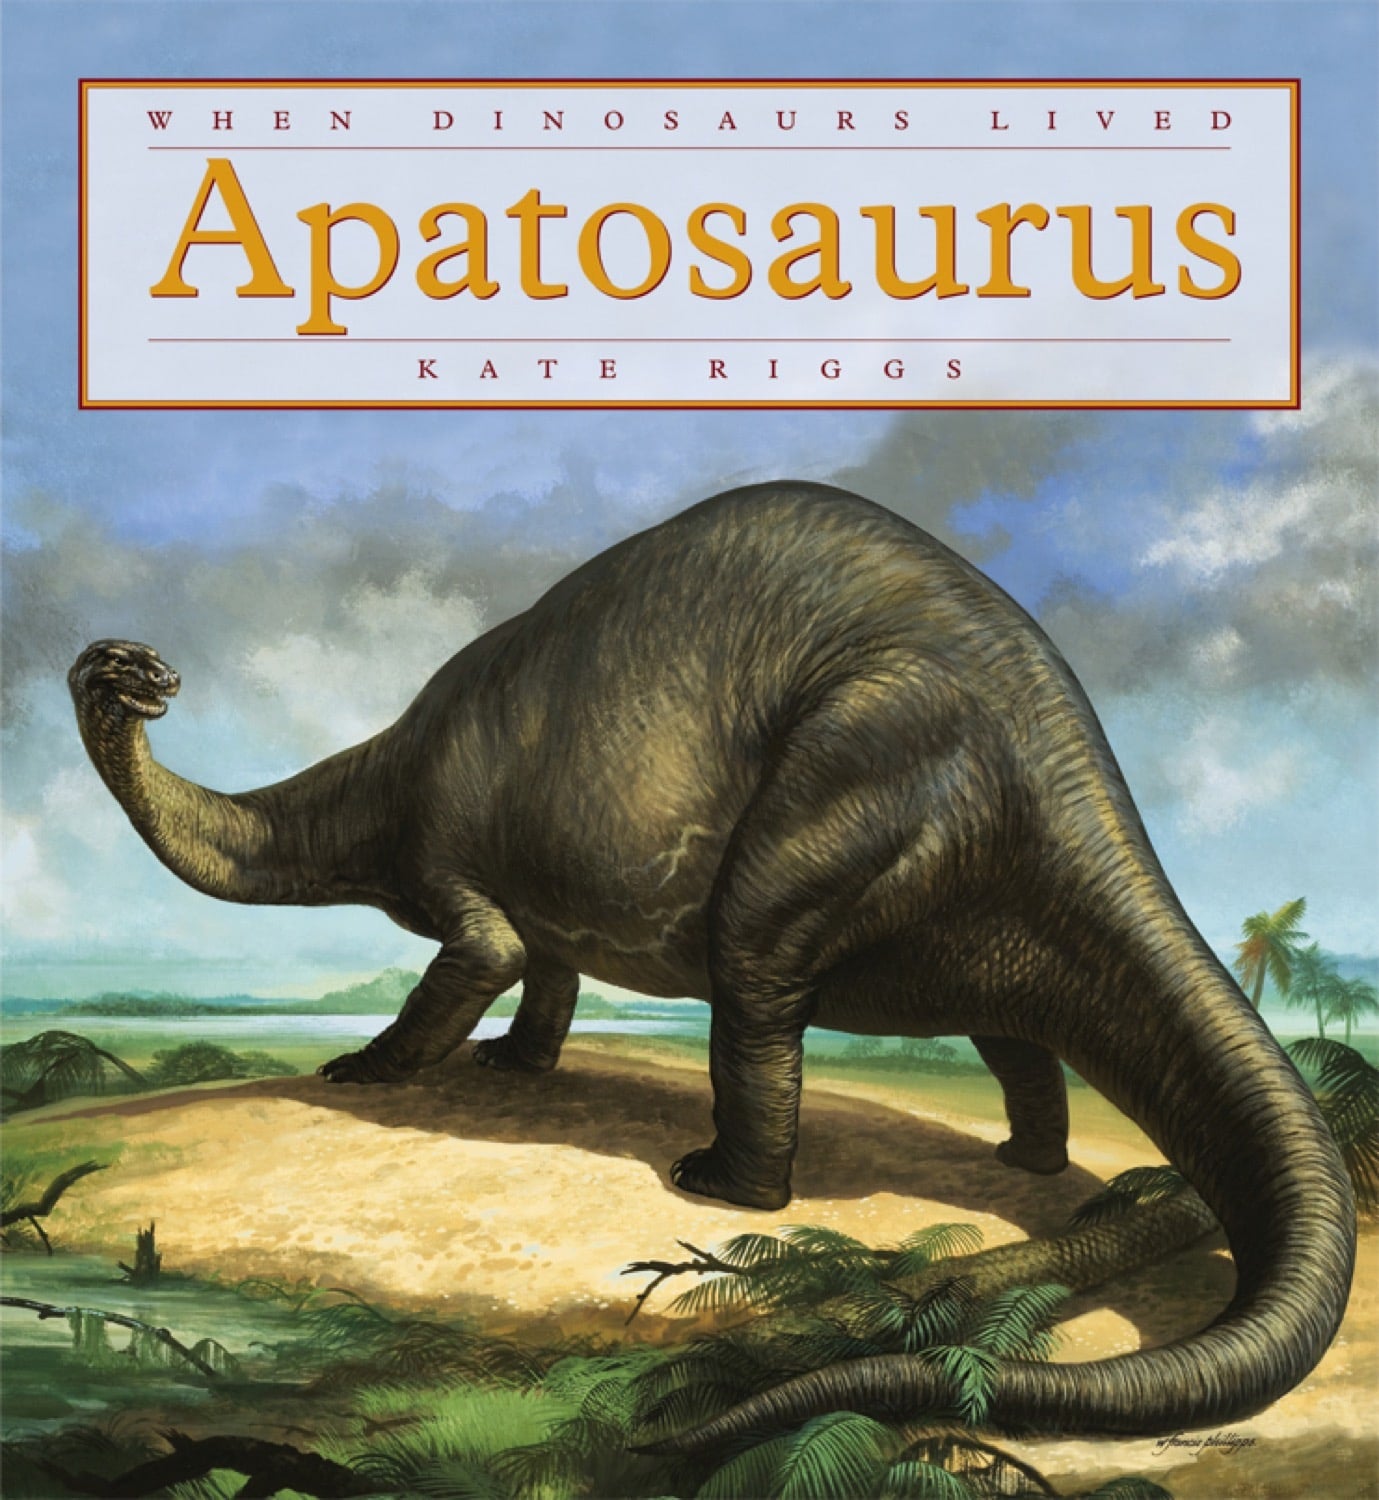 When Dinosaurs Lived: Apatosaurus